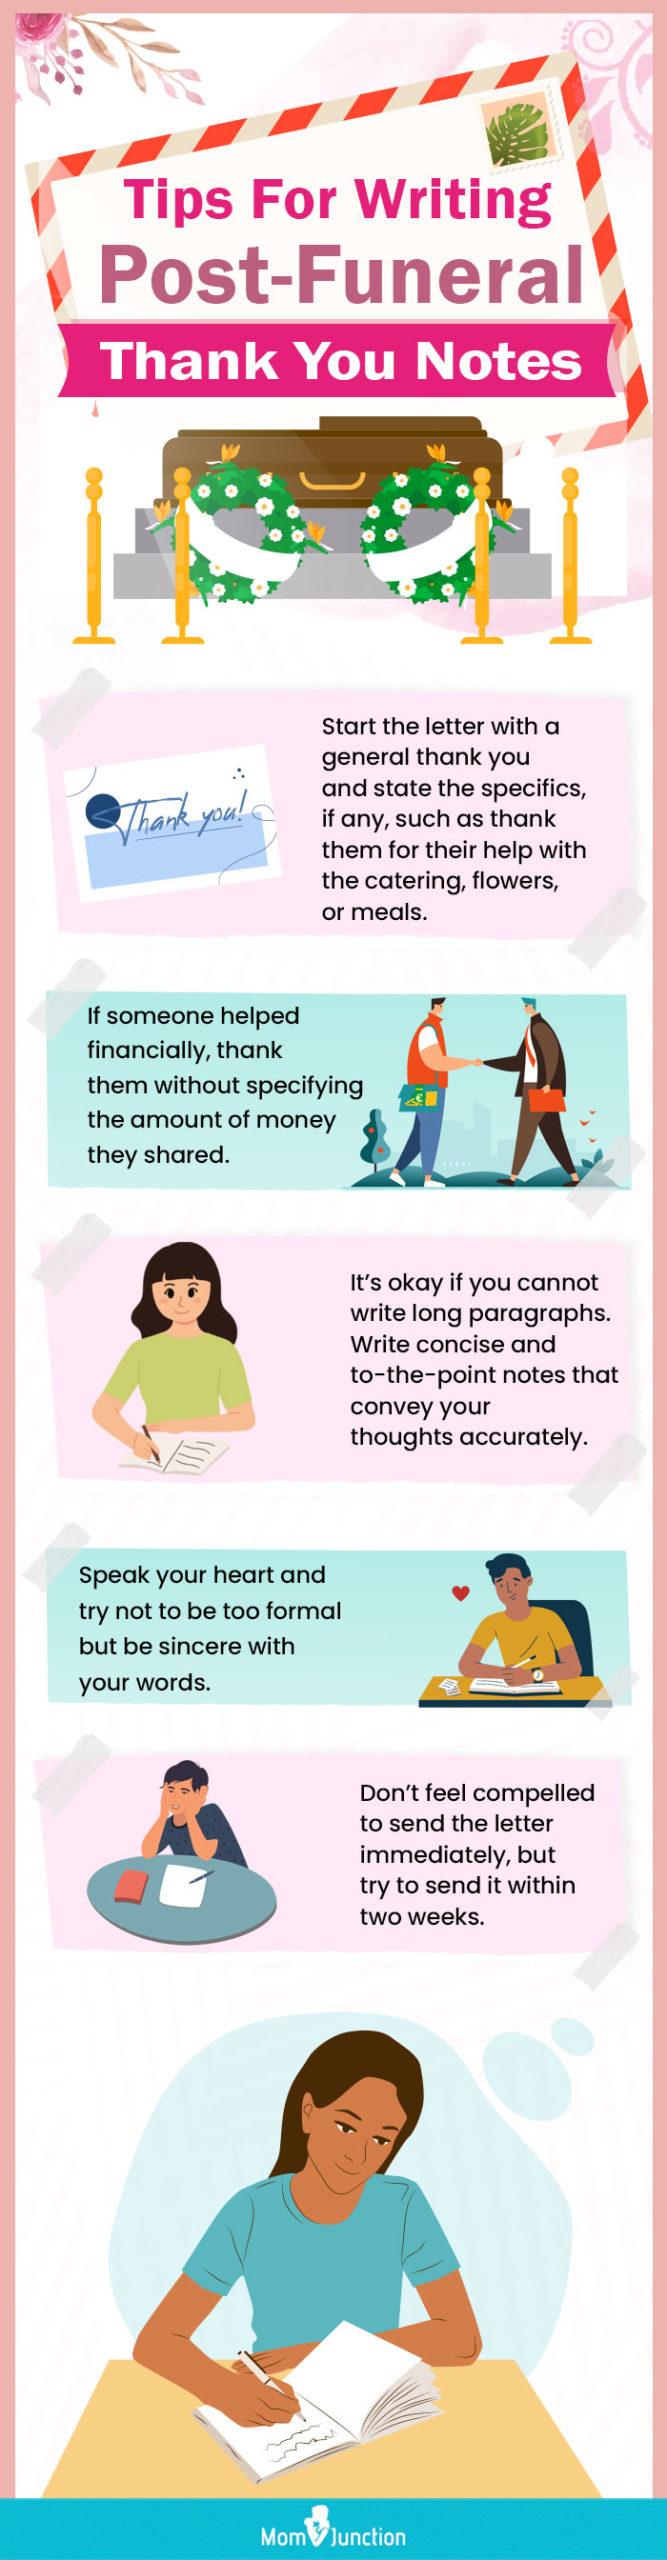 tips for writing post funeral thank you notes [infographic]